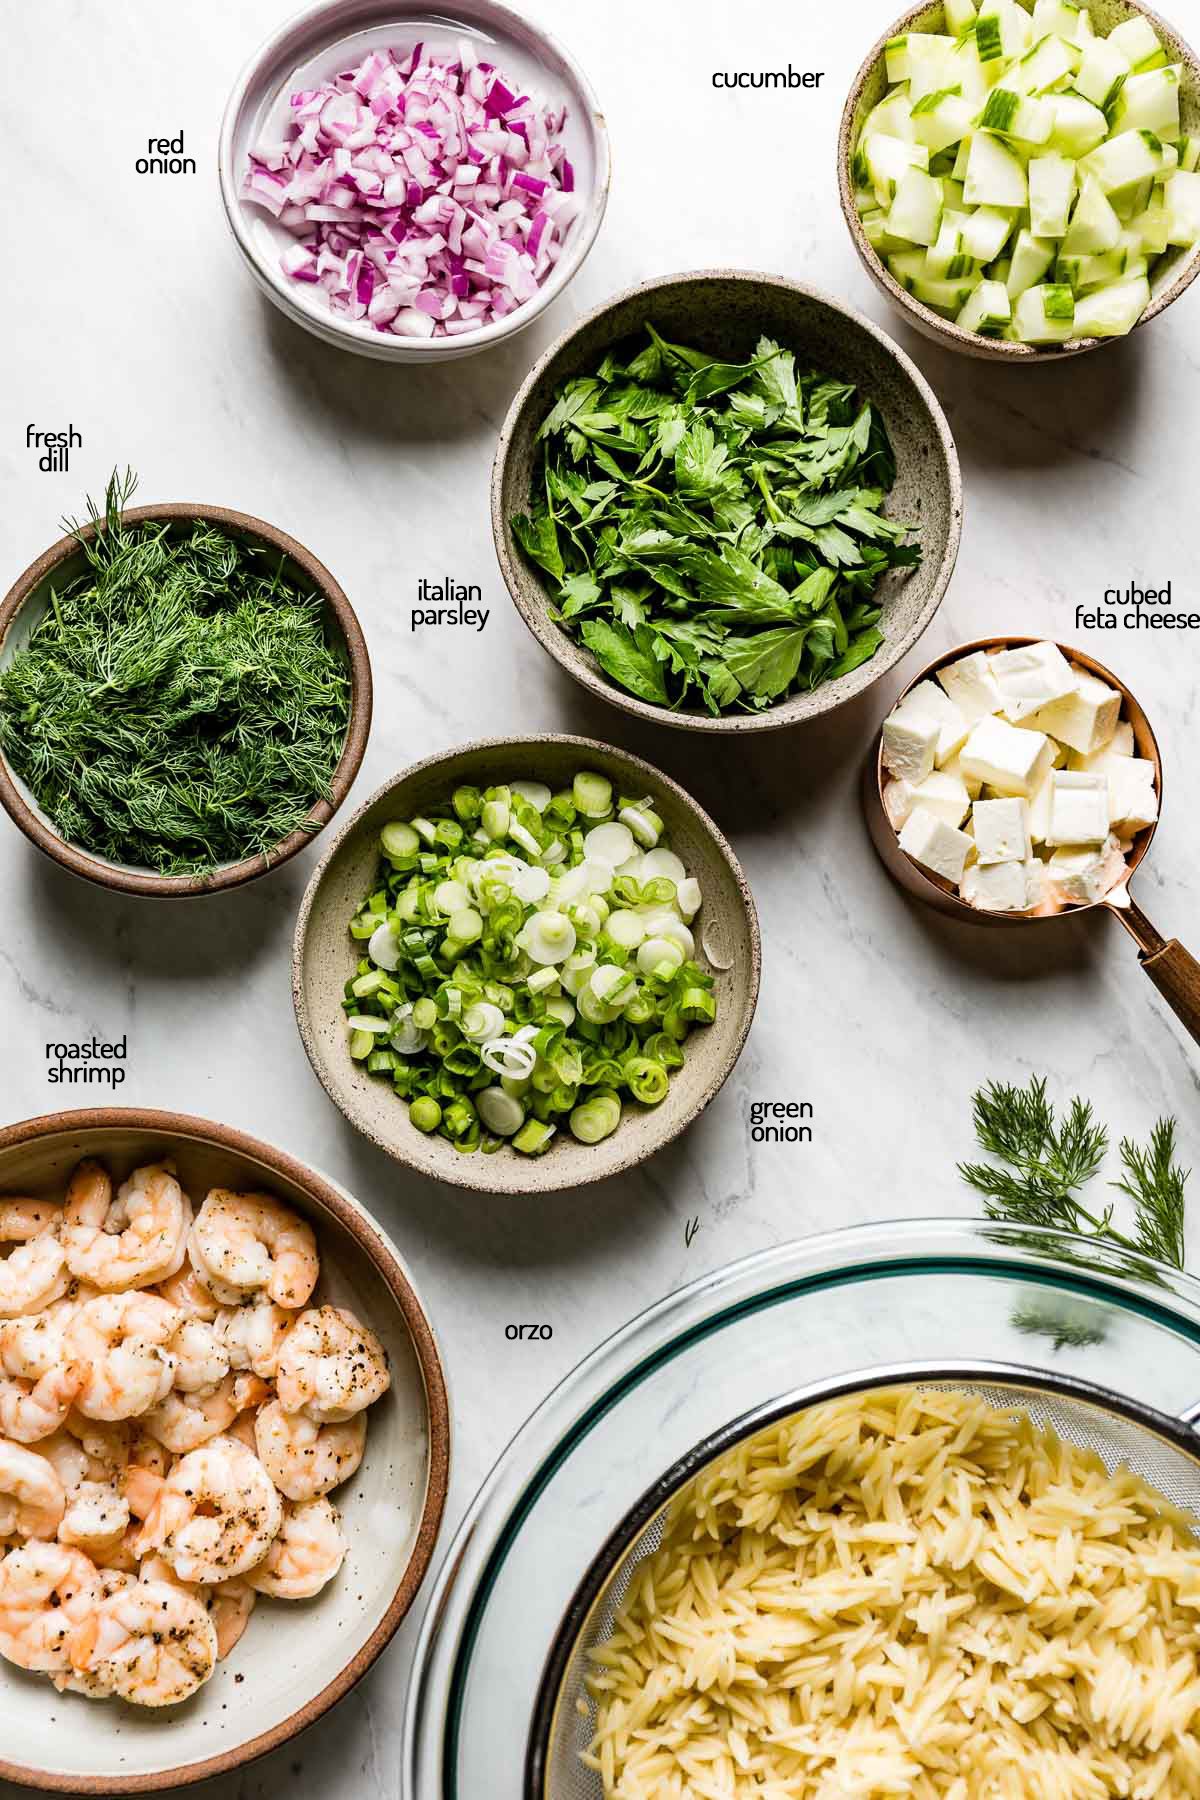 Each salad ingredient placed in small bowls from top view